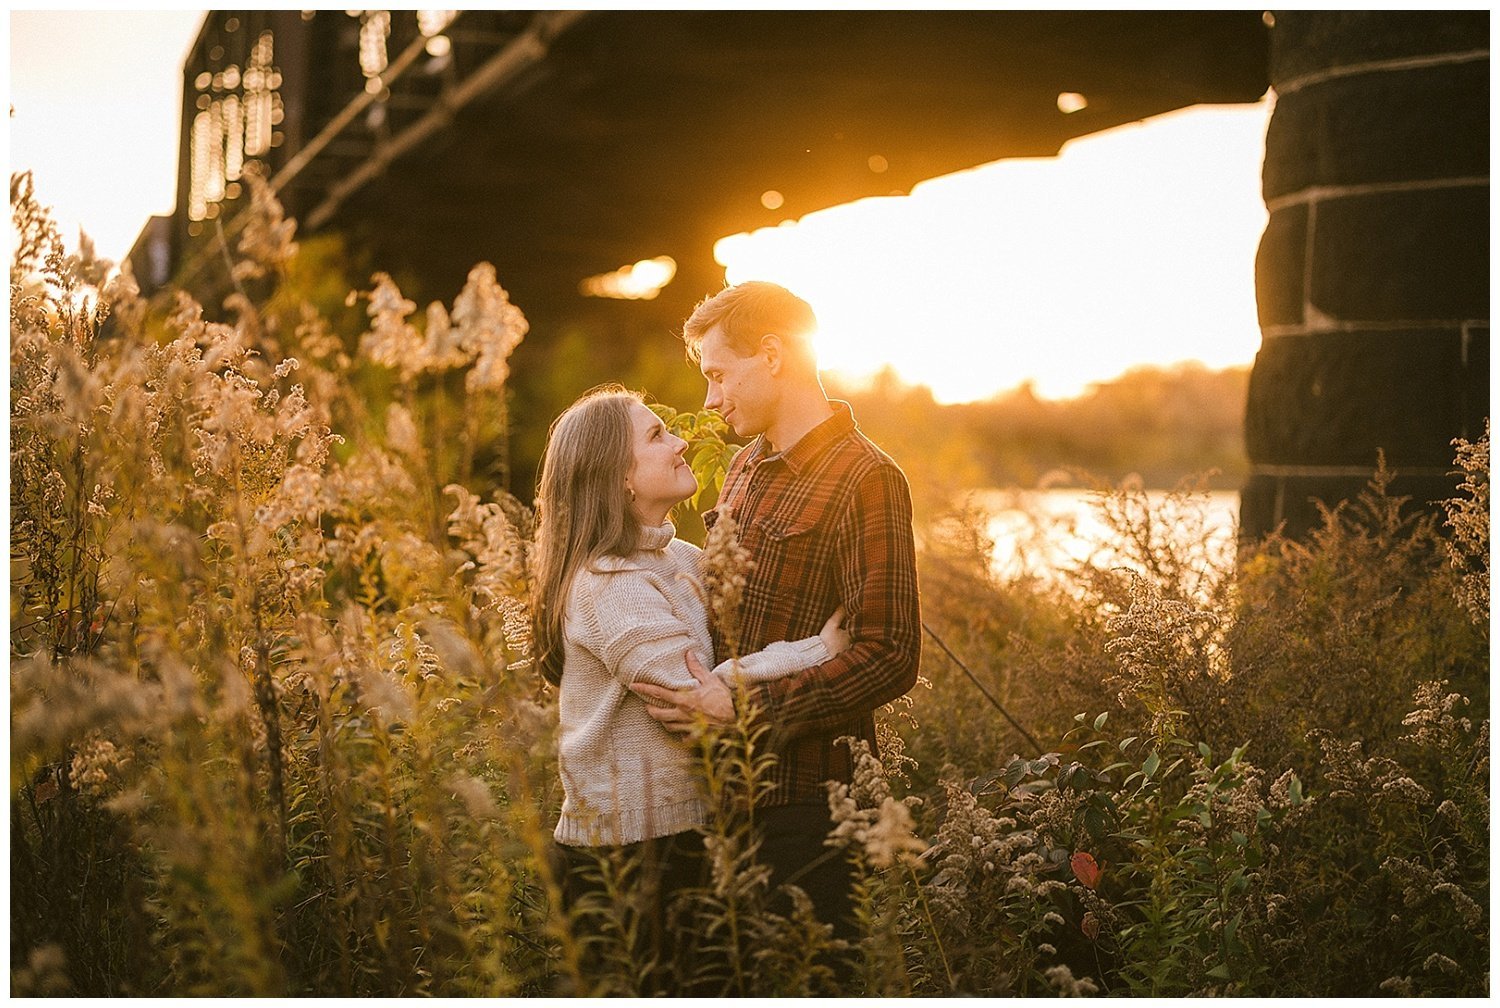 scioto-mile-and-german-village-engagement-robb-mccormick-photography_0015.jpg